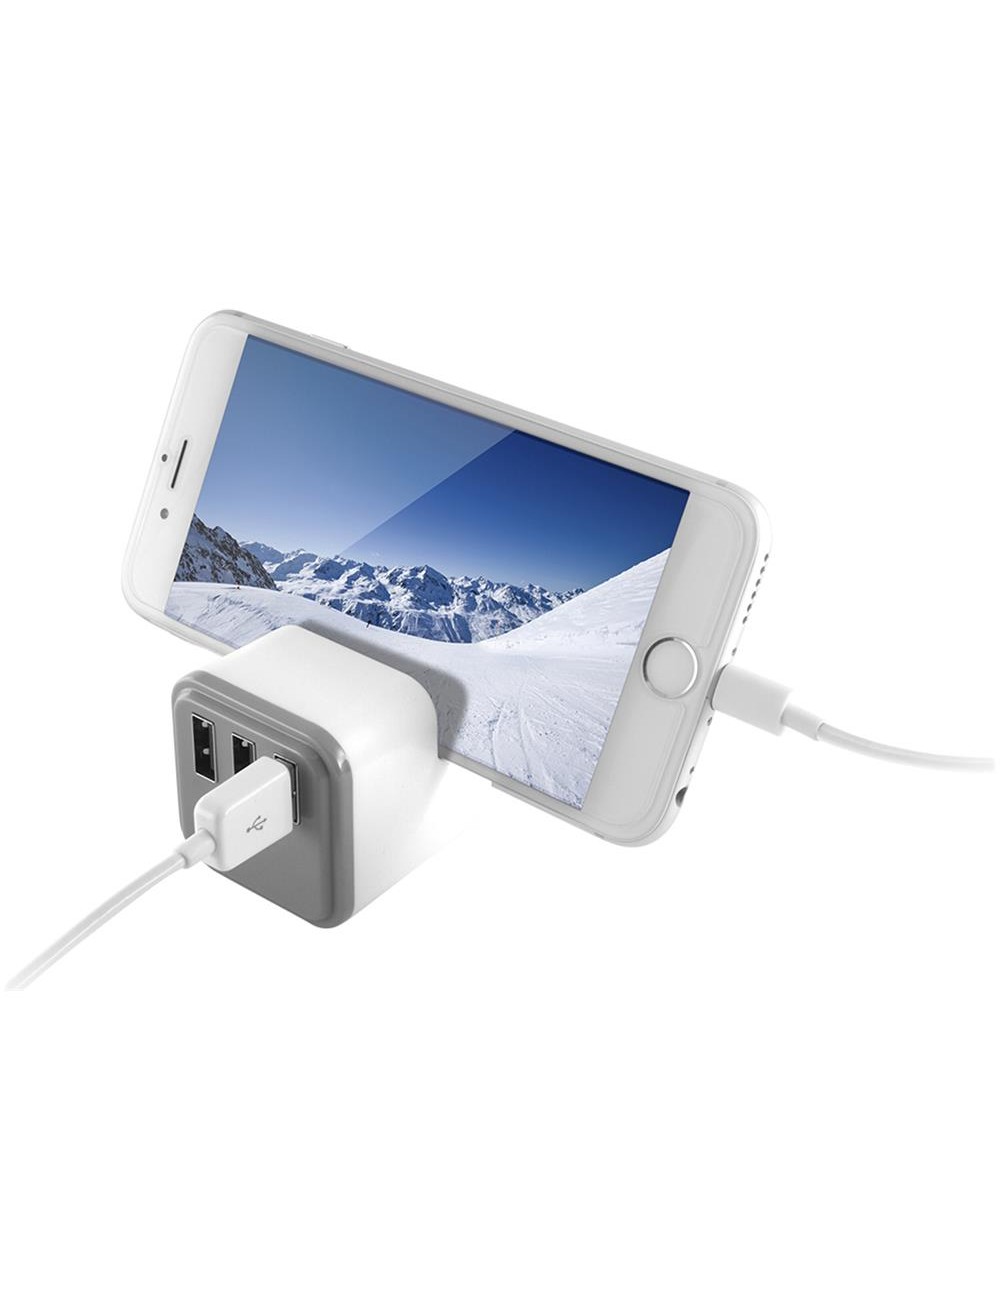 KSIX CARICABATTERIE USB CON SUPPORTO E SMARTCHARGE